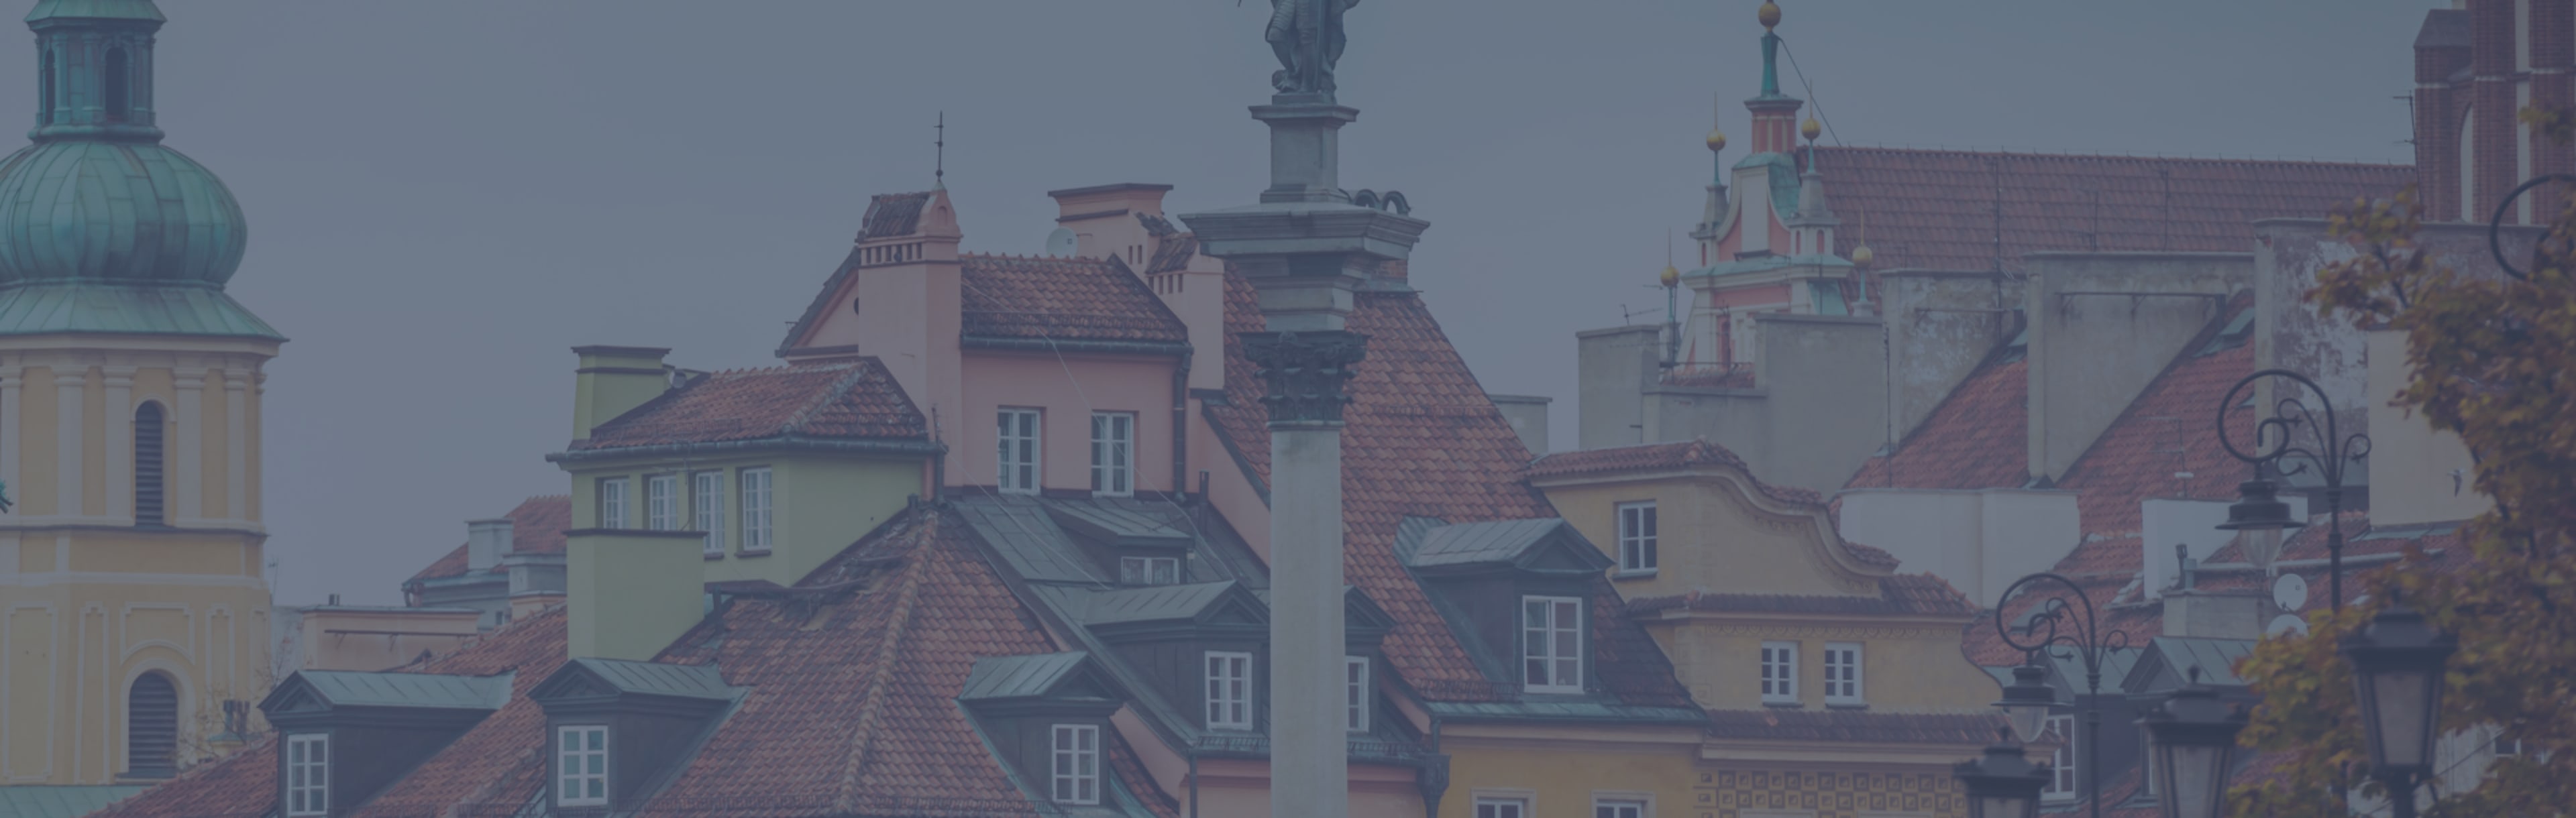 Contact Schools Directly - Compare 3 LLM Programs in Poland 2023